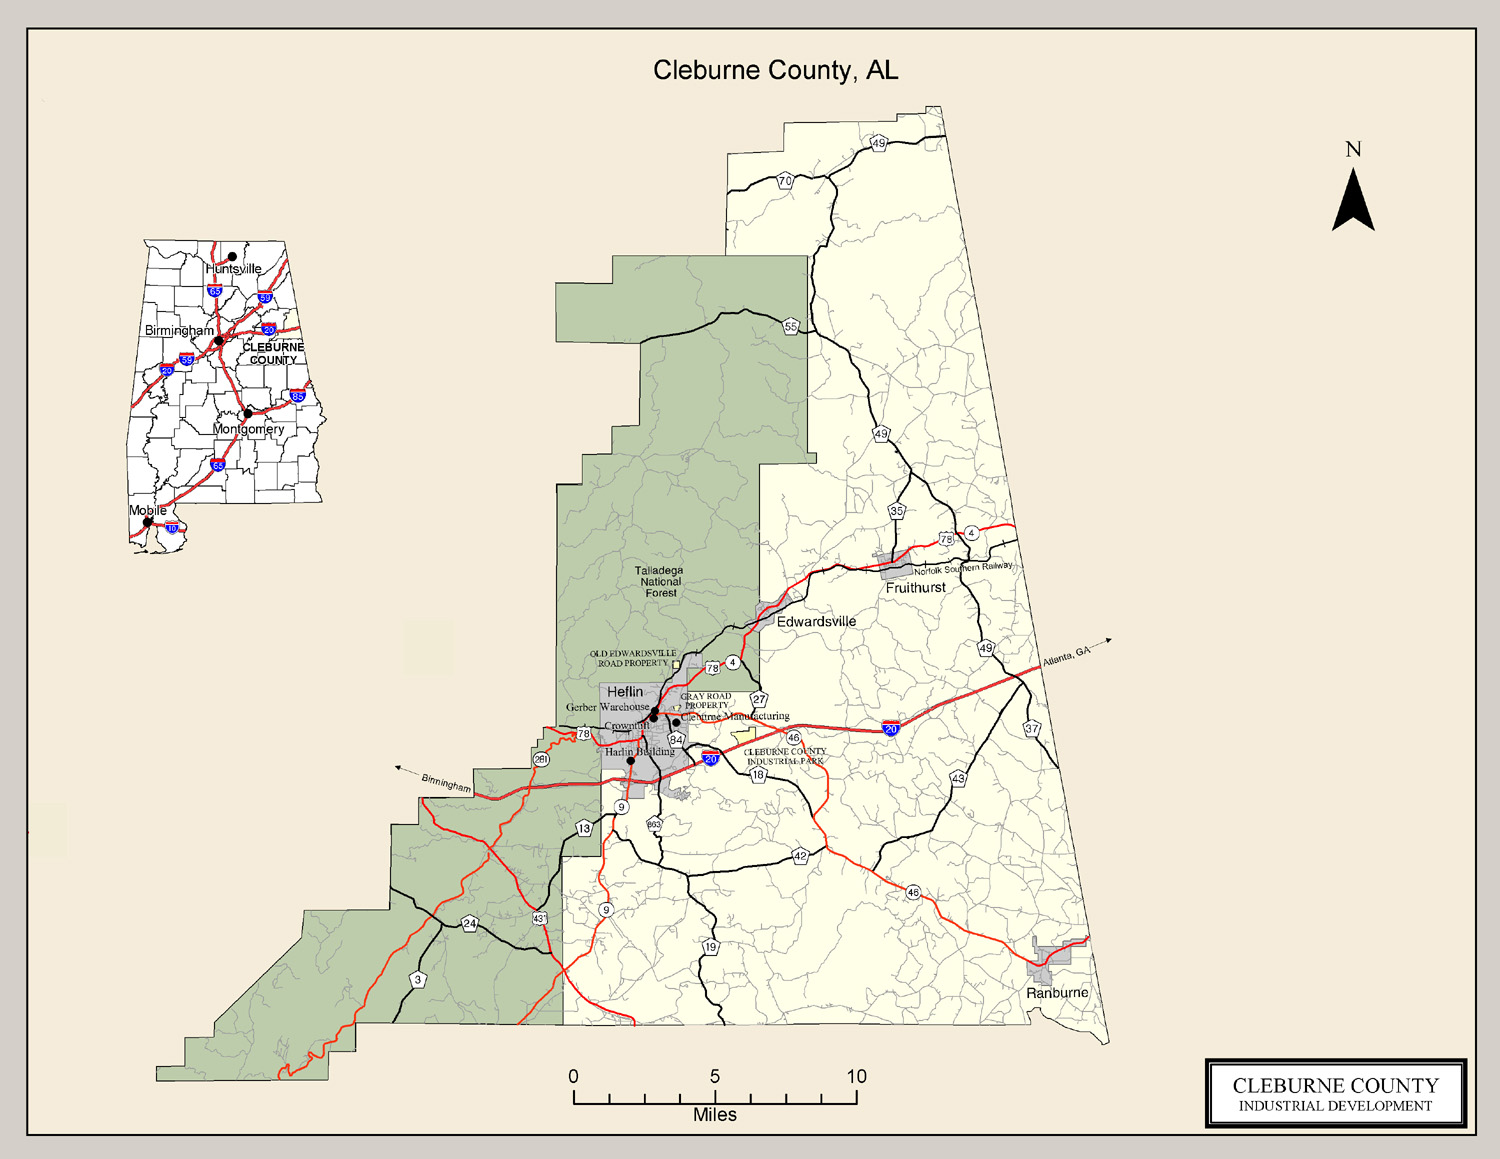 Maps of Cleburne County